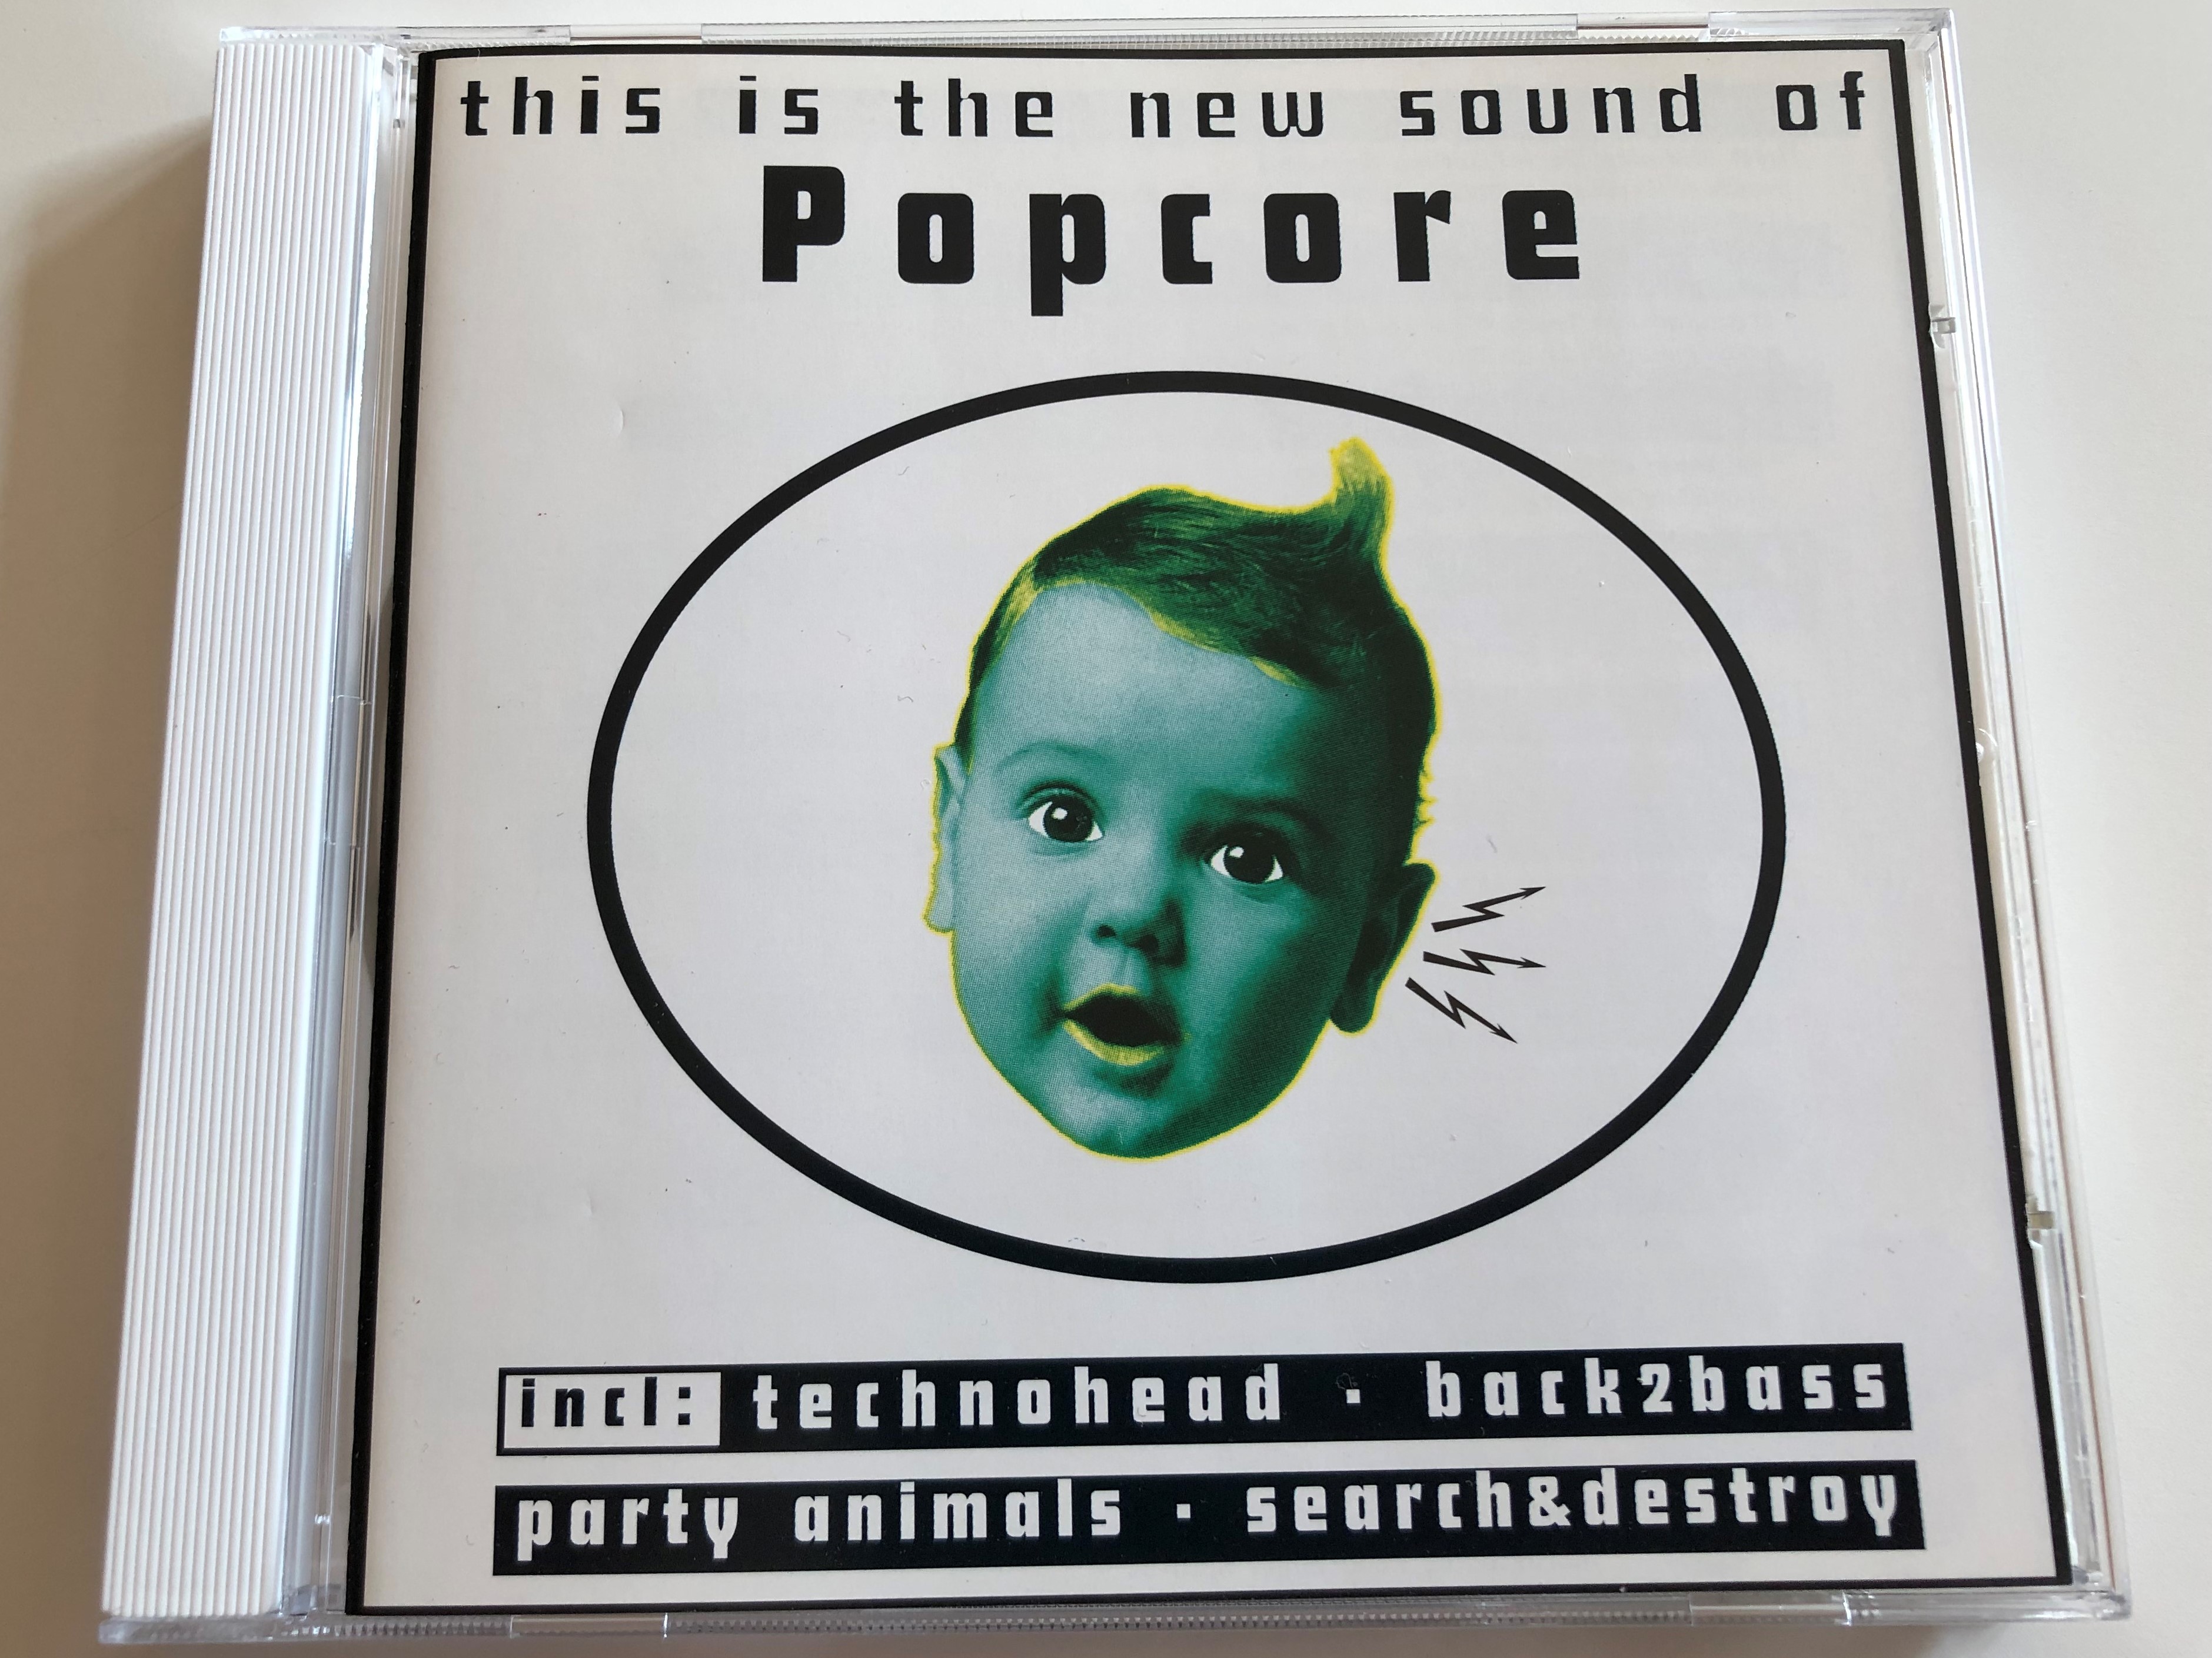 this-is-the-new-sound-of-popcore-incl-technohead-back2bass-party-animals-search-destroy-audio-cd-1996-mokum-records-db-4785-2-1-.jpg